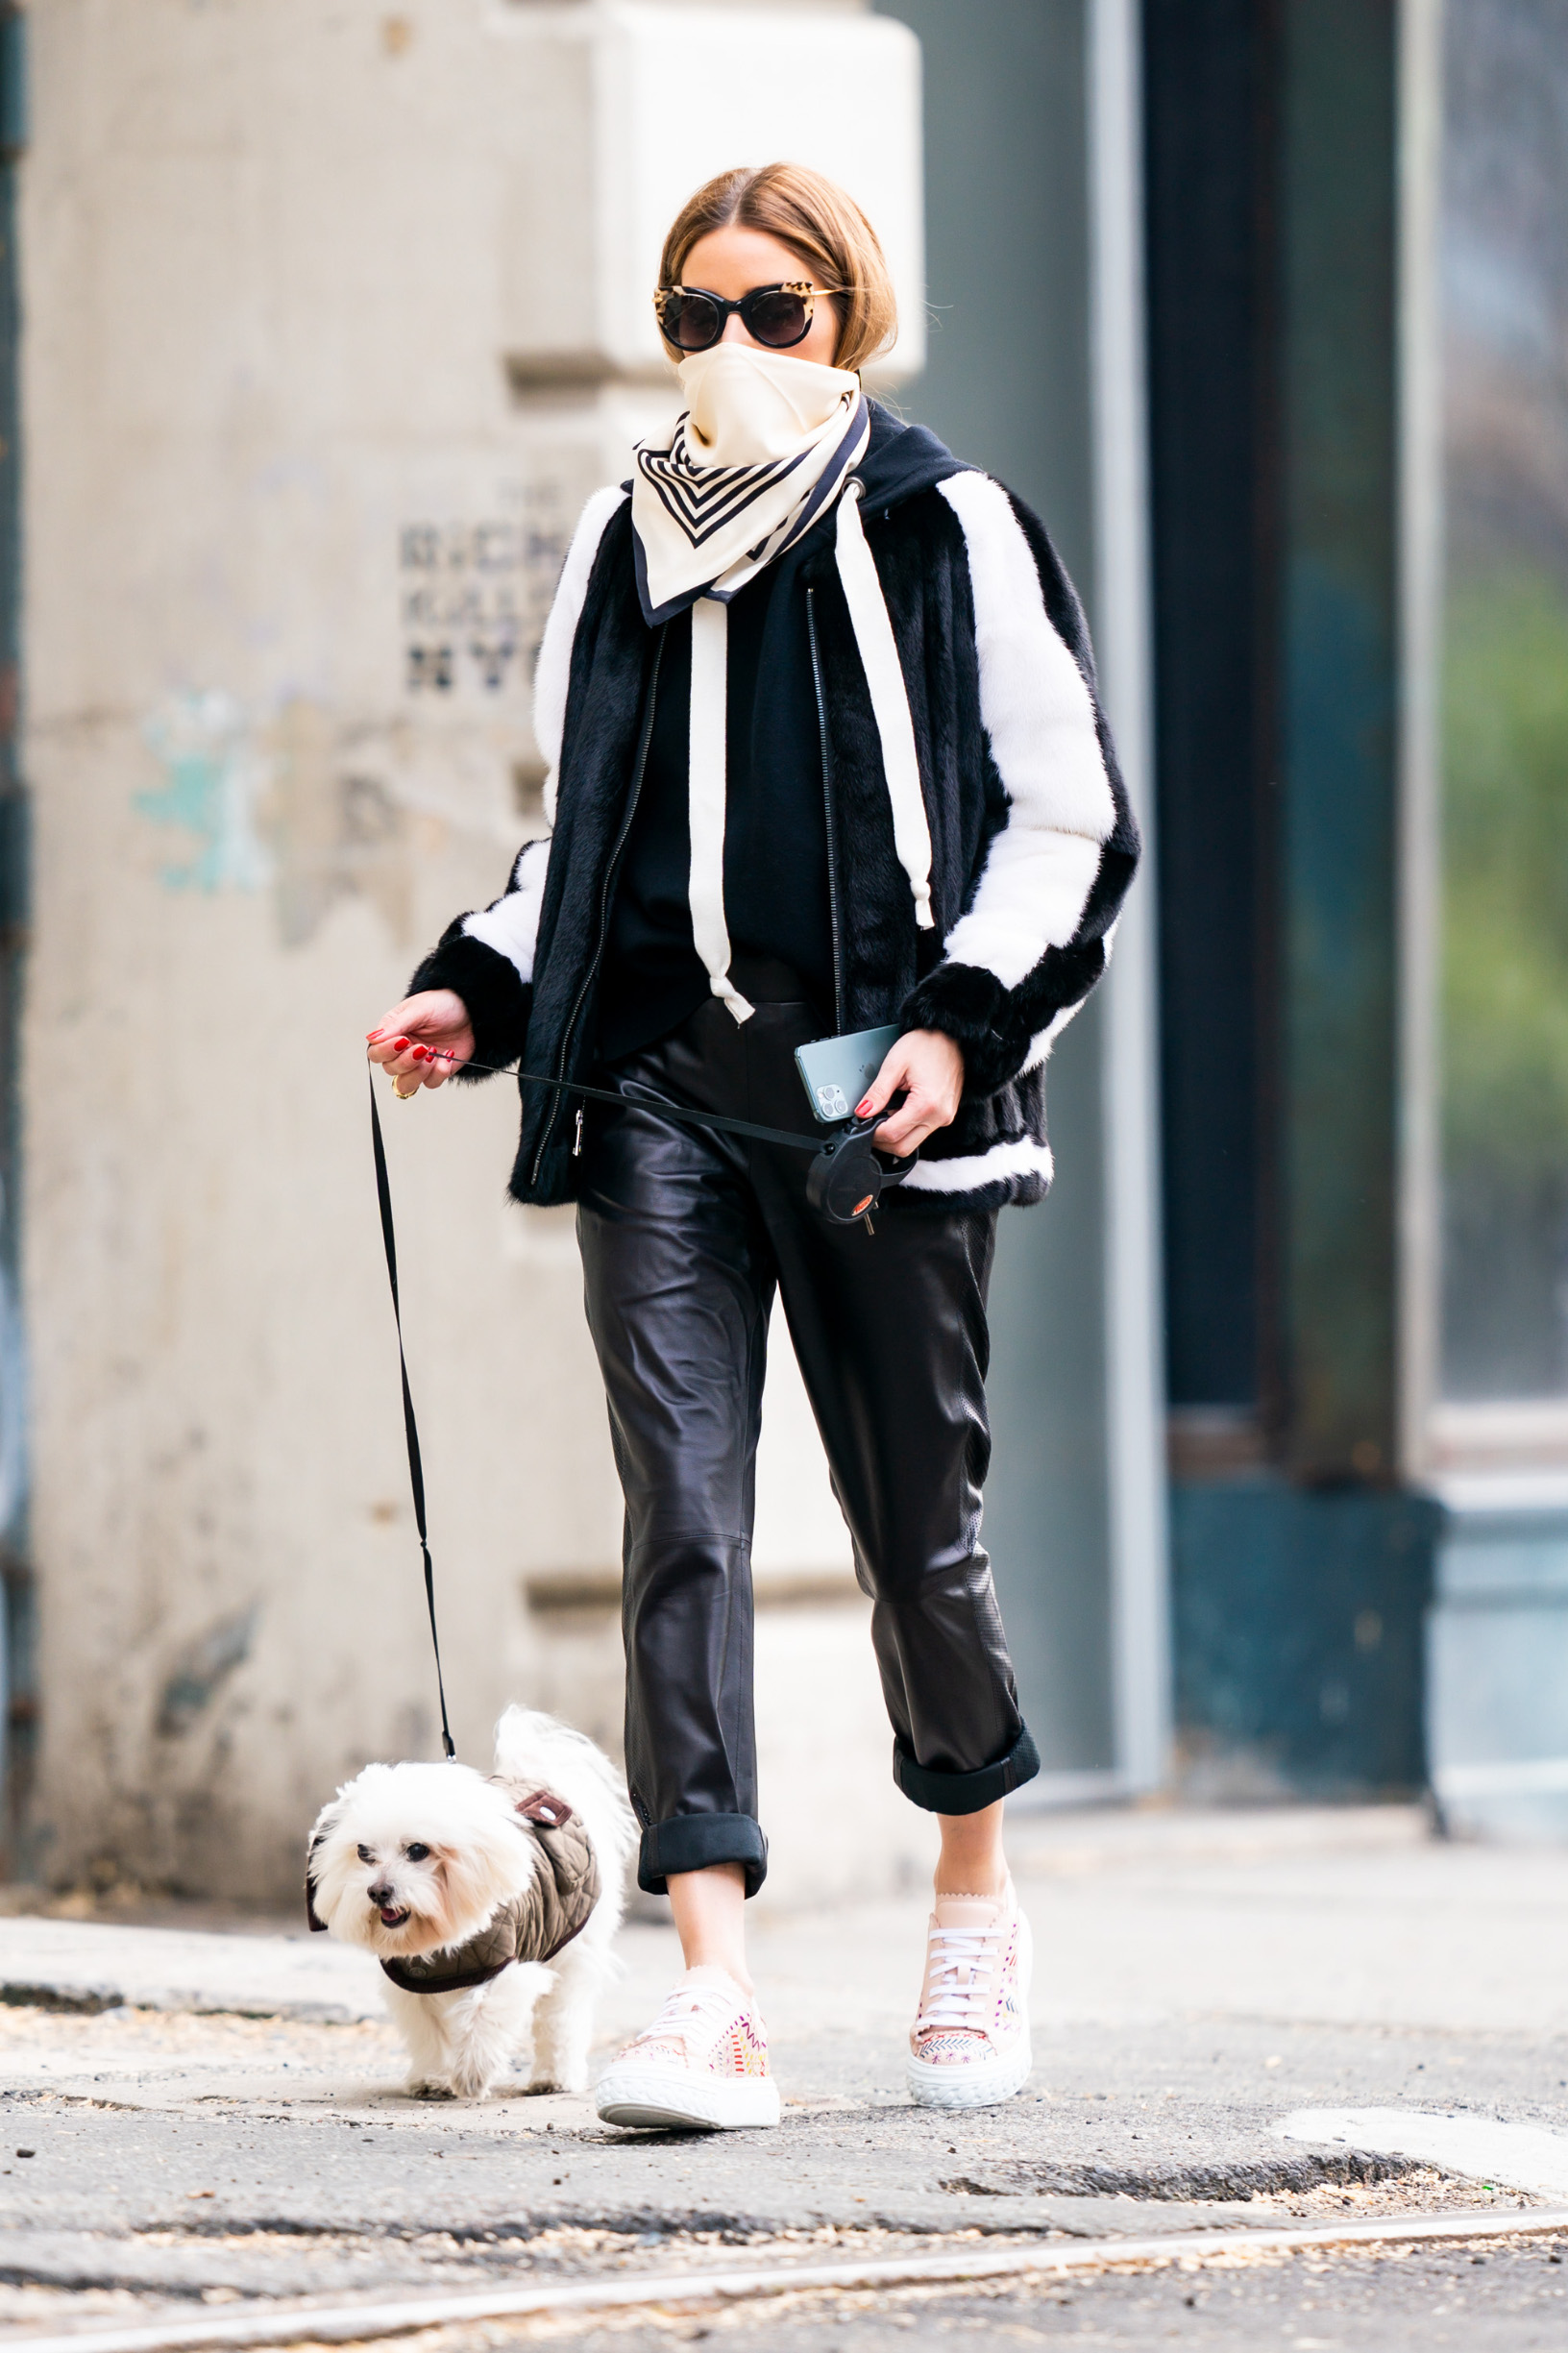 04/28/2020 EXCLUSIVE: Olivia Palermo steps out for a dog walk in New York City. The 34 year old socialite wore a scarf over her mouth, black & white teddy coat, black trousers, and pink trainers., Image: 515744890, License: Rights-managed, Restrictions: Exclusive NO usage without agreed price and terms. Please contact sales@theimagedirect.com, Model Release: no, Credit line: TheImageDirect.com / The Image Direct / Profimedia